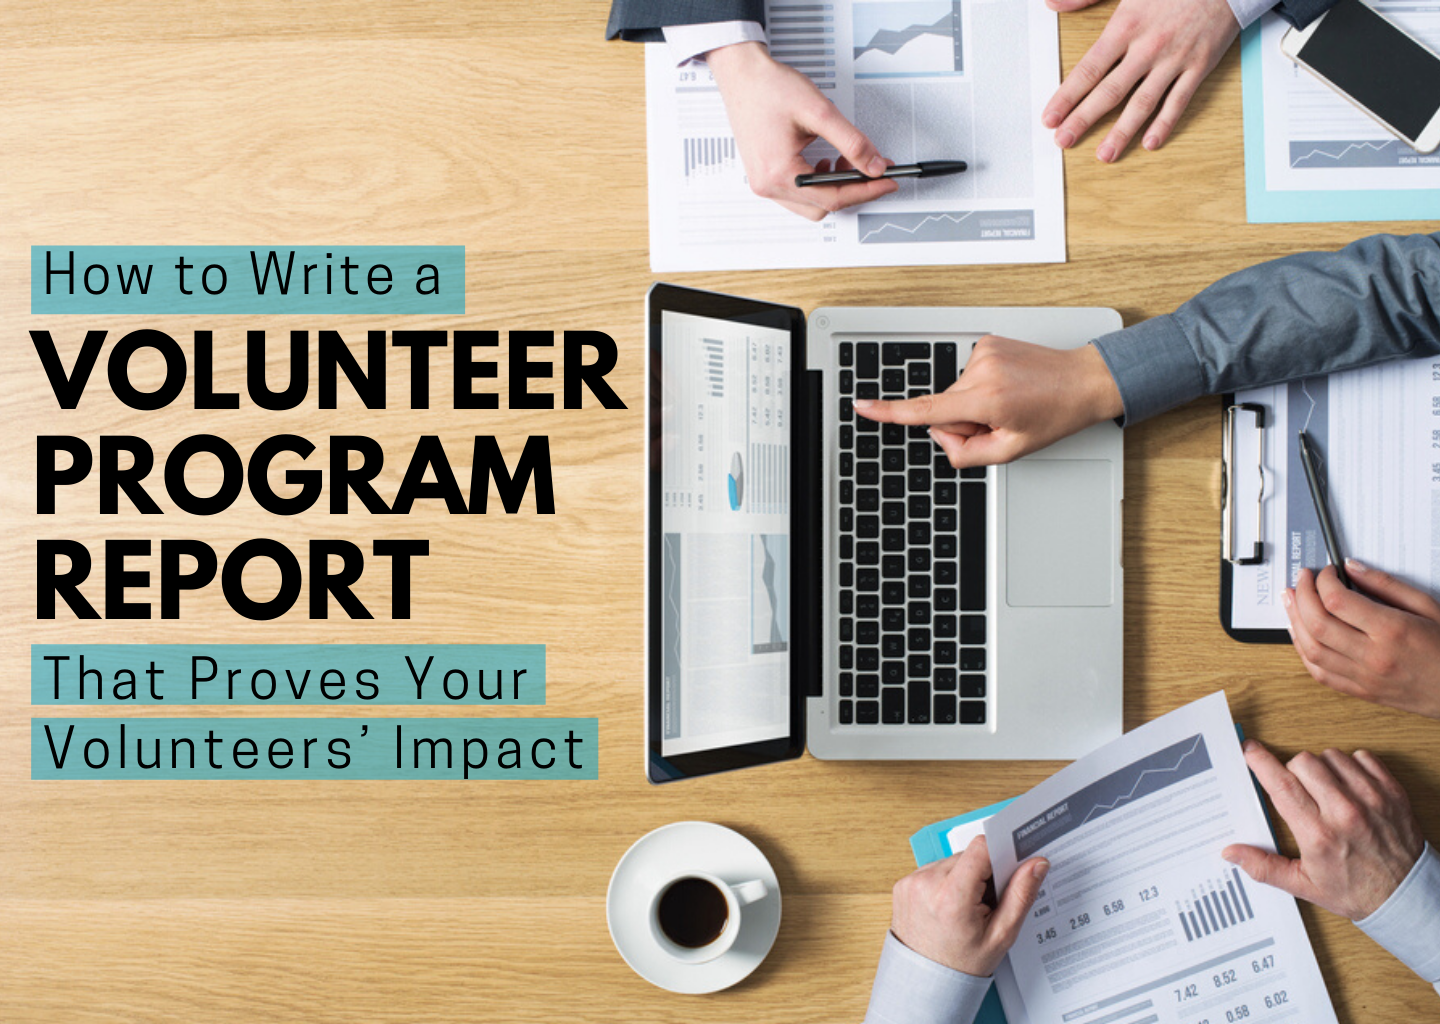 How to Write a Volunteer Program Report That Proves Your Volunteers’ Impact